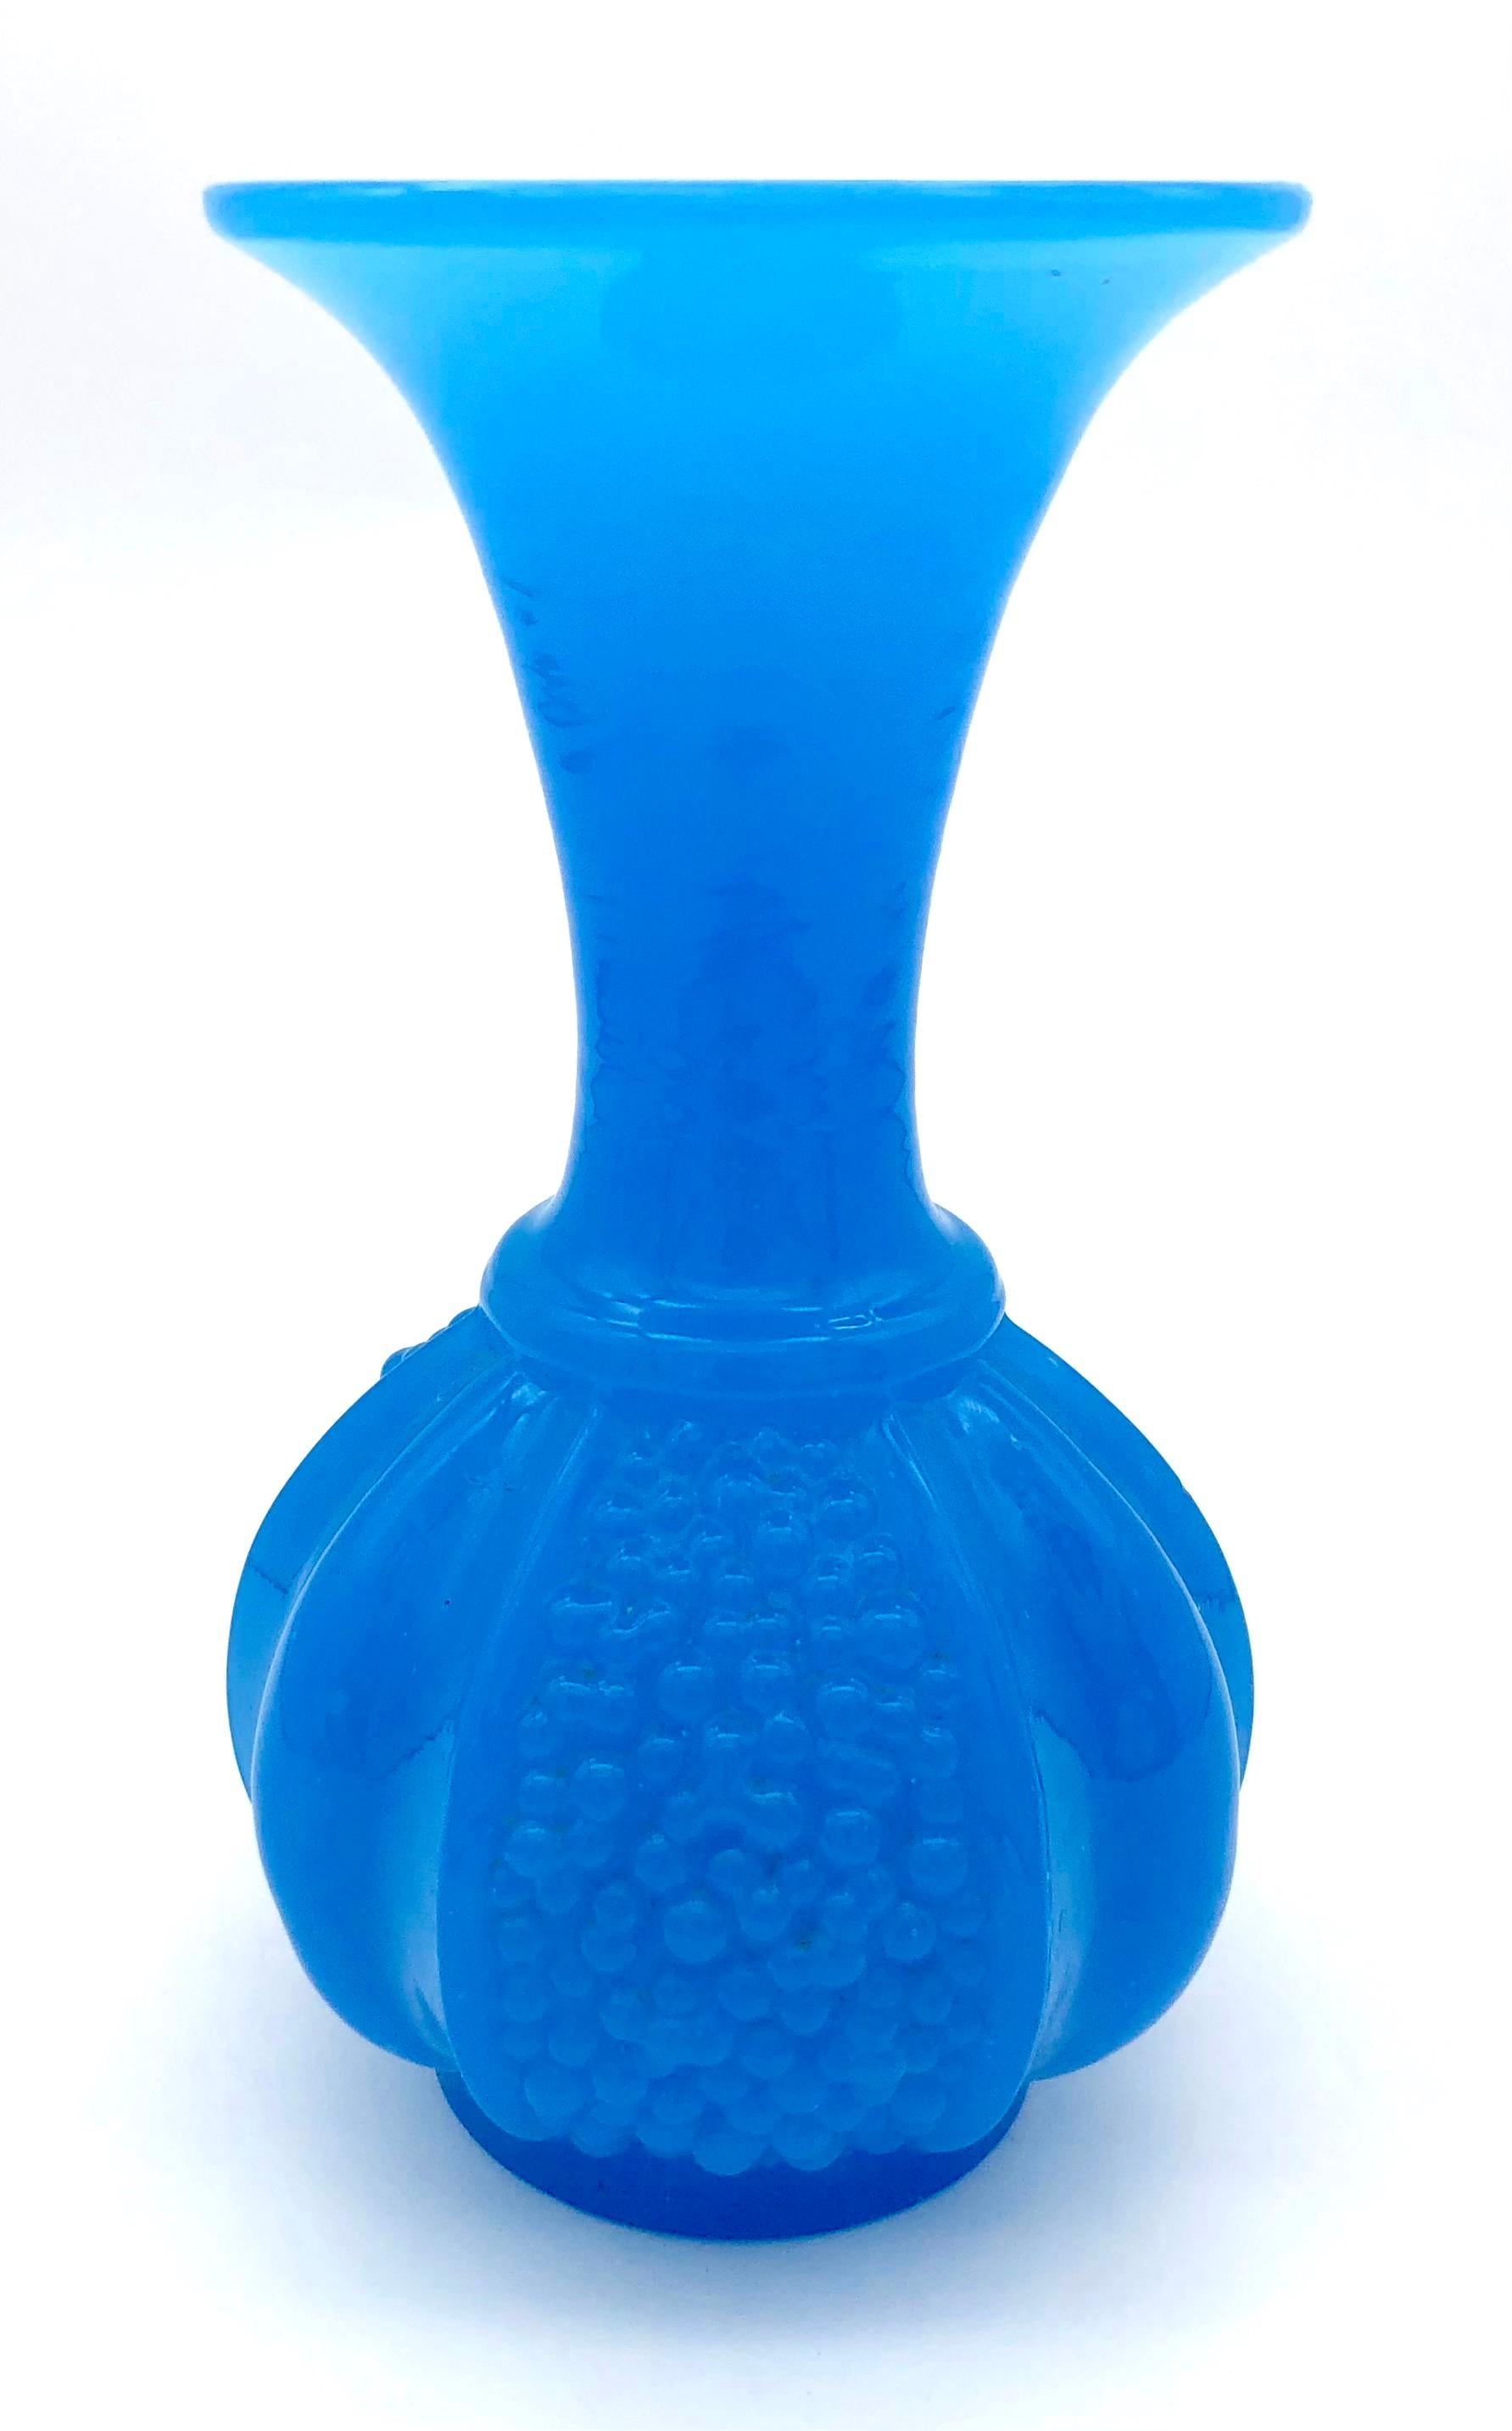 This fine piece of opaque blue molded glass has been made the famous French glass manufacturer Baccarat.